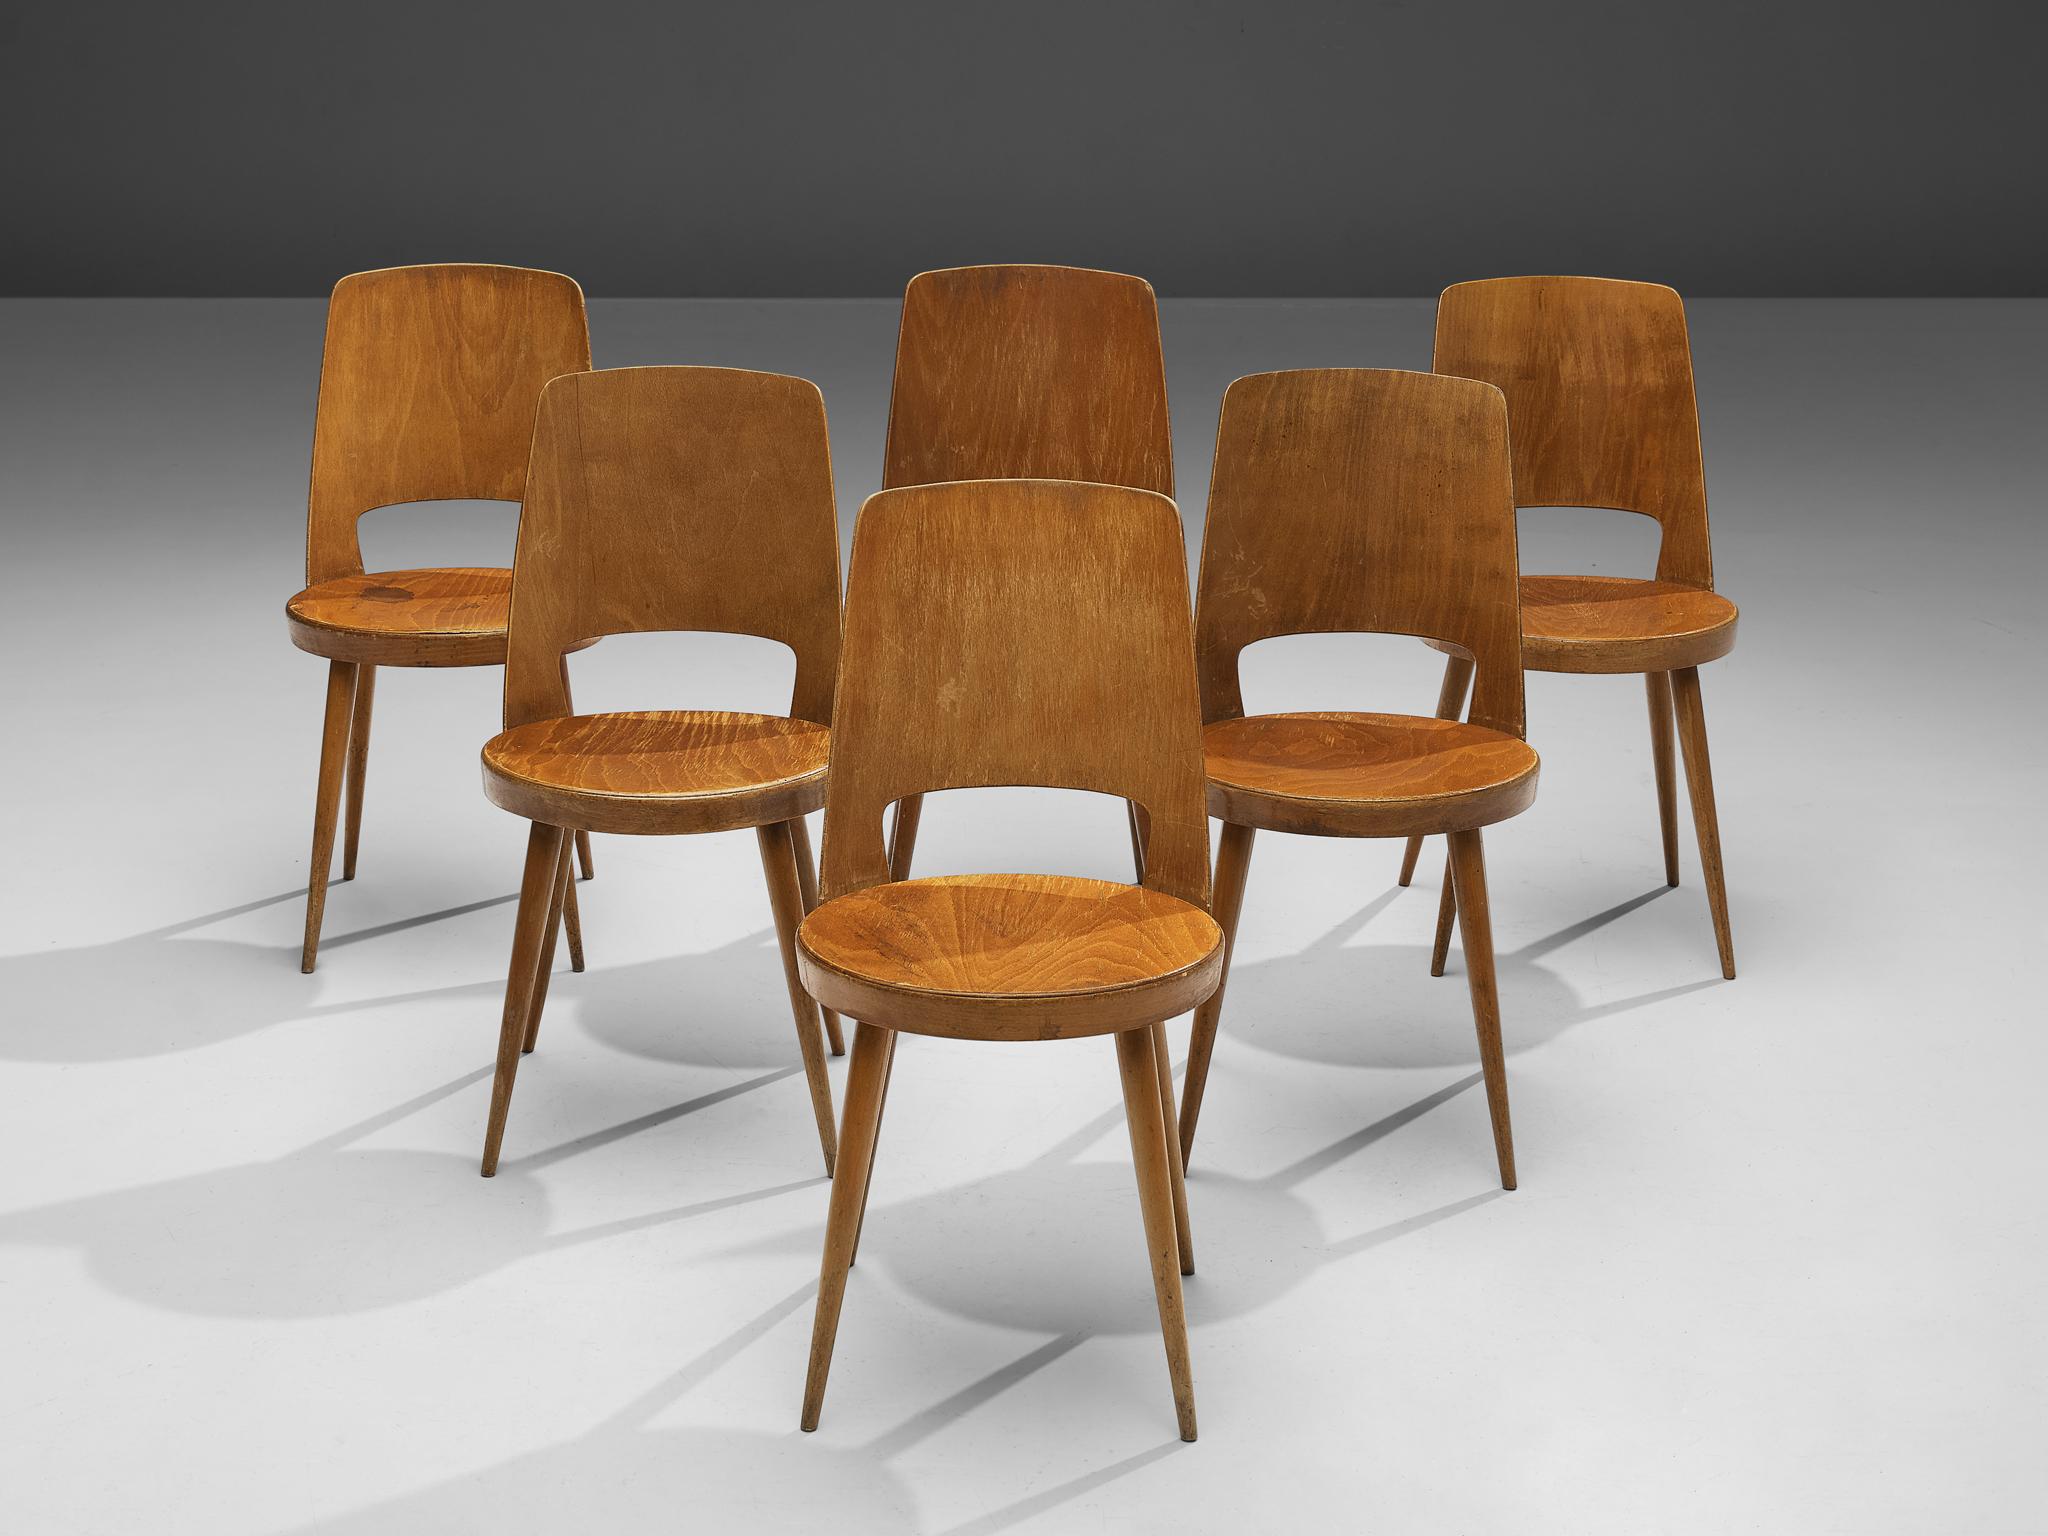 Jomaine Baumann, large set of 'Mondor' dining chairs, plywood, wood, France, 1960s

The ‘Mondor’ dining chair was manufactured by French furniture maker Jomaine Baumann. Characteristic for the ‘Mondor’ chair is the curved bentwood back with a